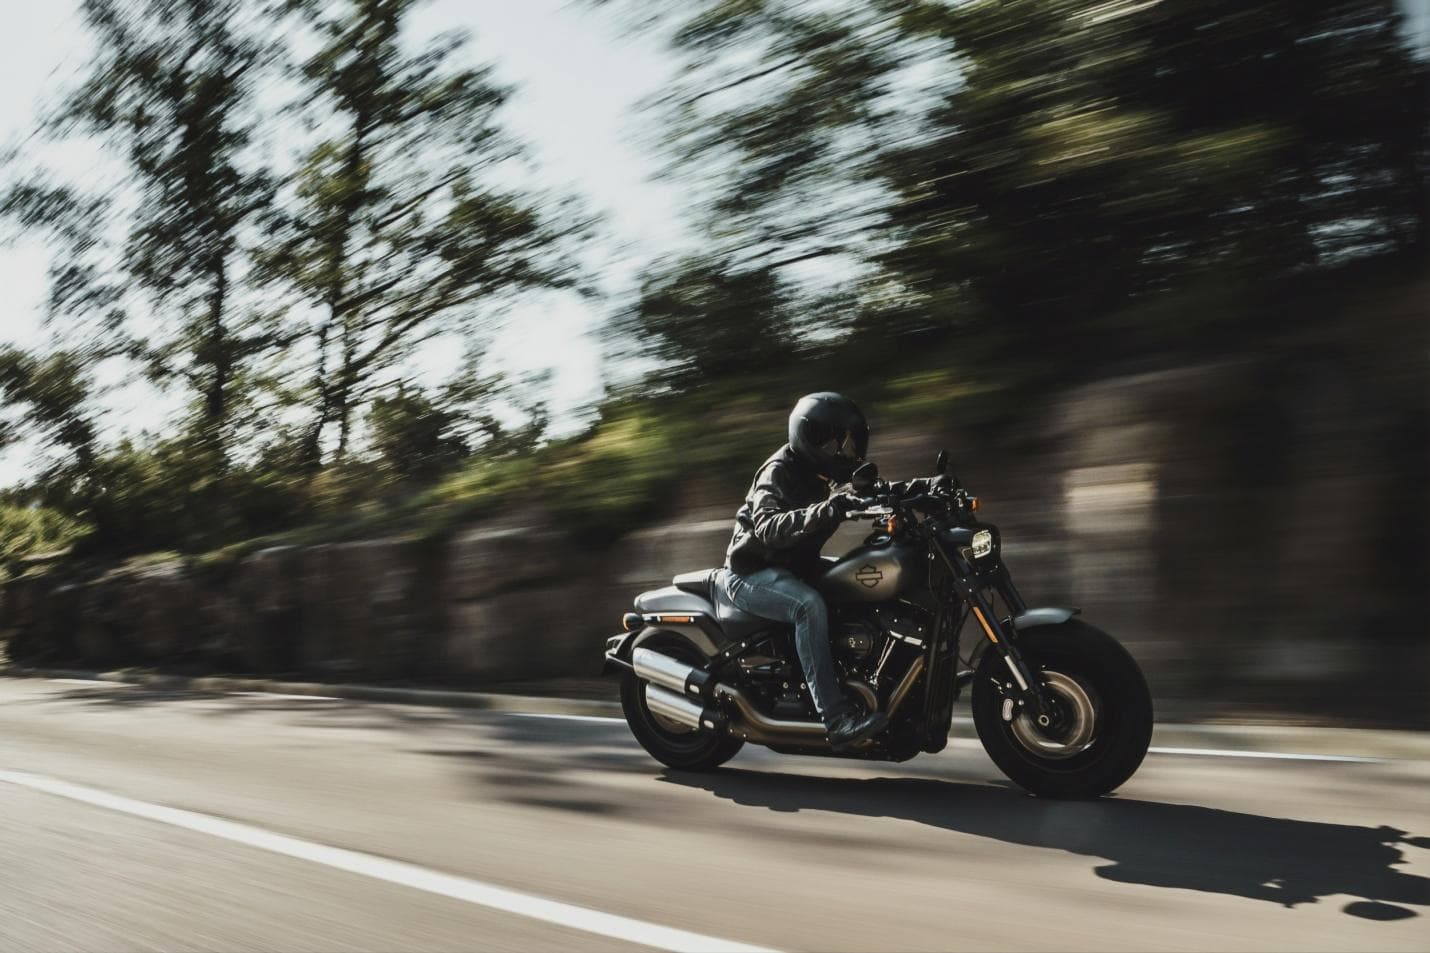 Four Common Road Hazards that Cause Motorcycle Accidents in Nevada